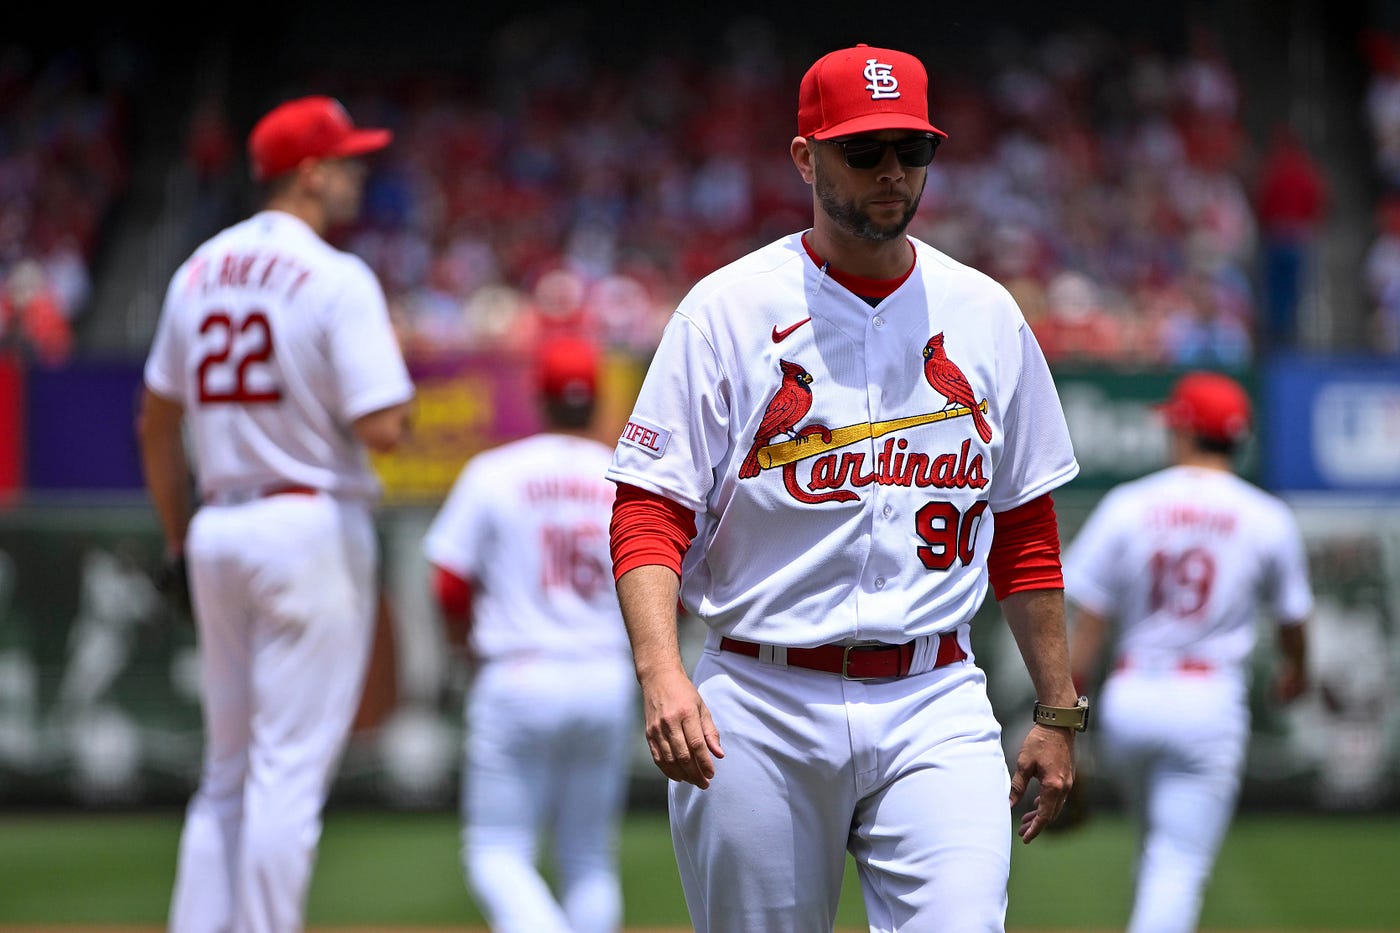 Why don't the Cardinals wear their red jersey anymore? They haven